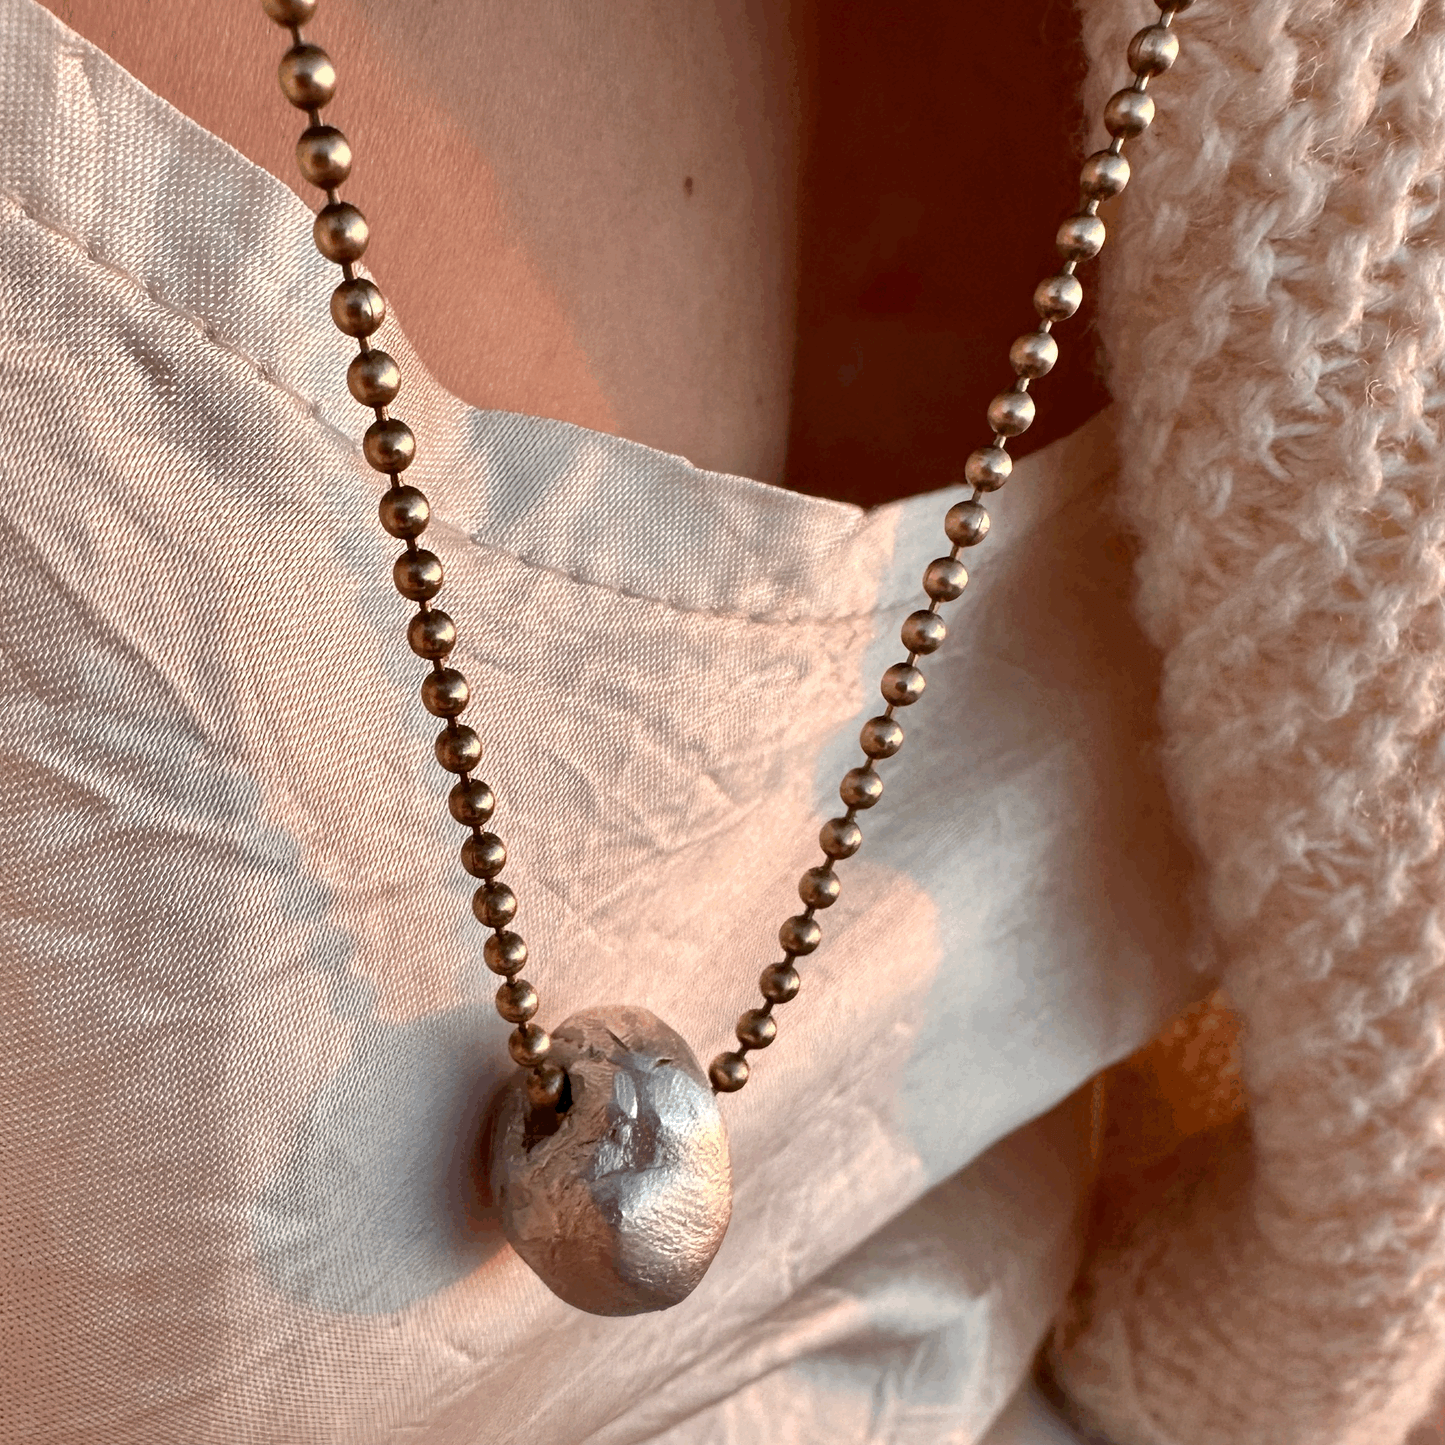 A solid silver hag stone pendant on a brass chain, worn by a model.